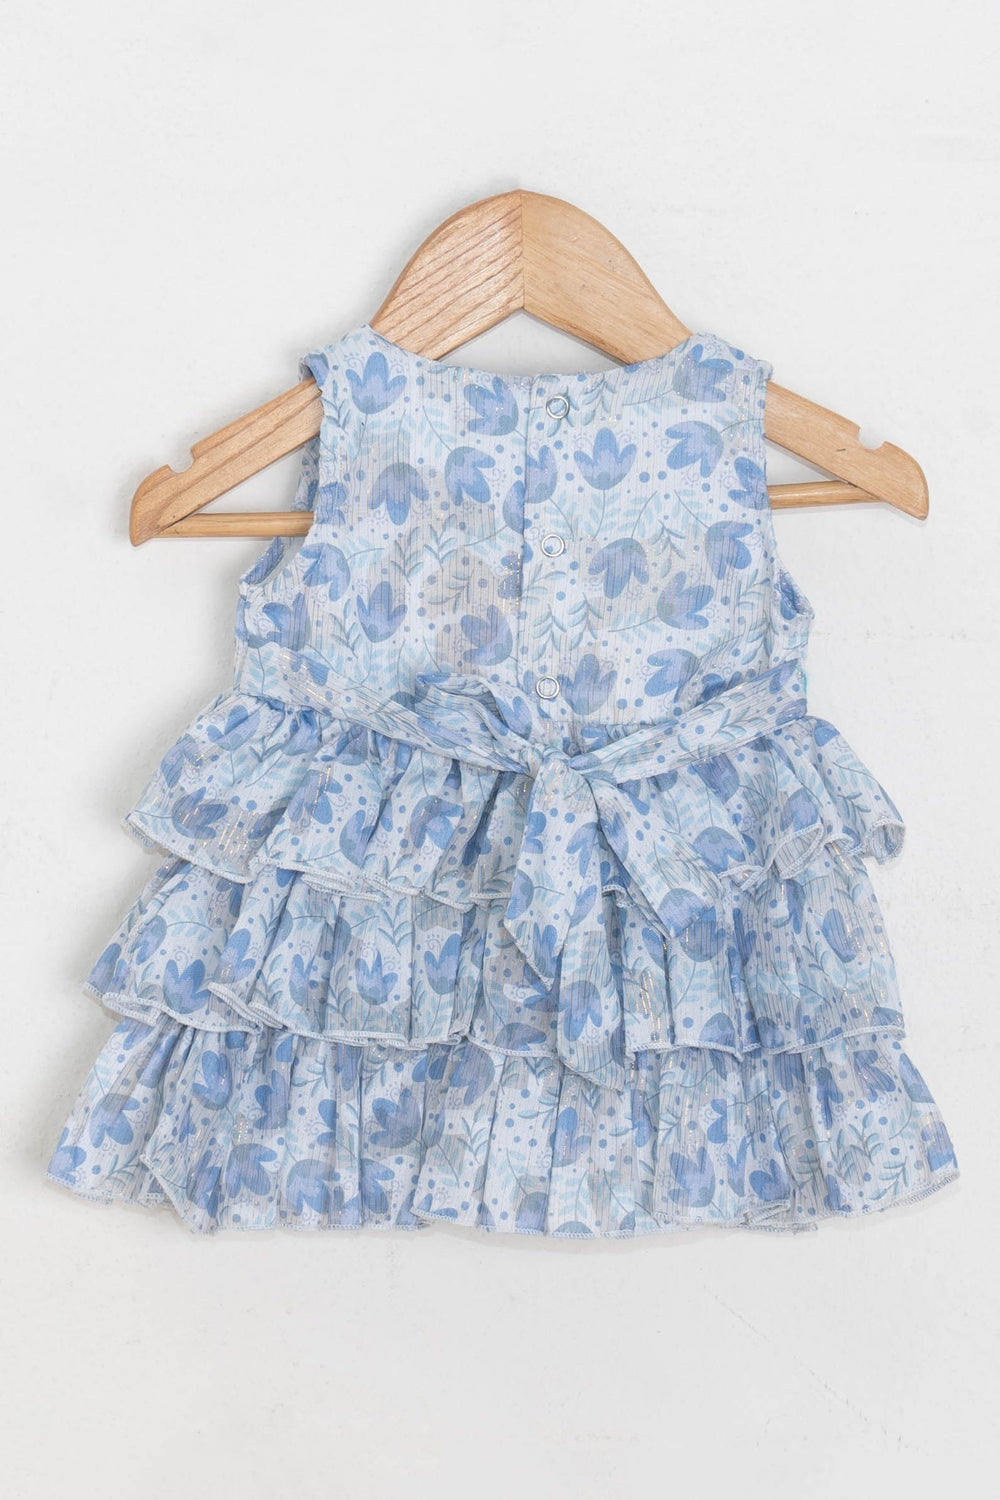 The Nesavu Baby Fancy Frock Lovely Blue Floral Printed Sleeveless Layer Frock With Bow Appliques For Girls Nesavu Party wear cotton frocks for babies | Ethnic Wear For Girls | The Nesavu